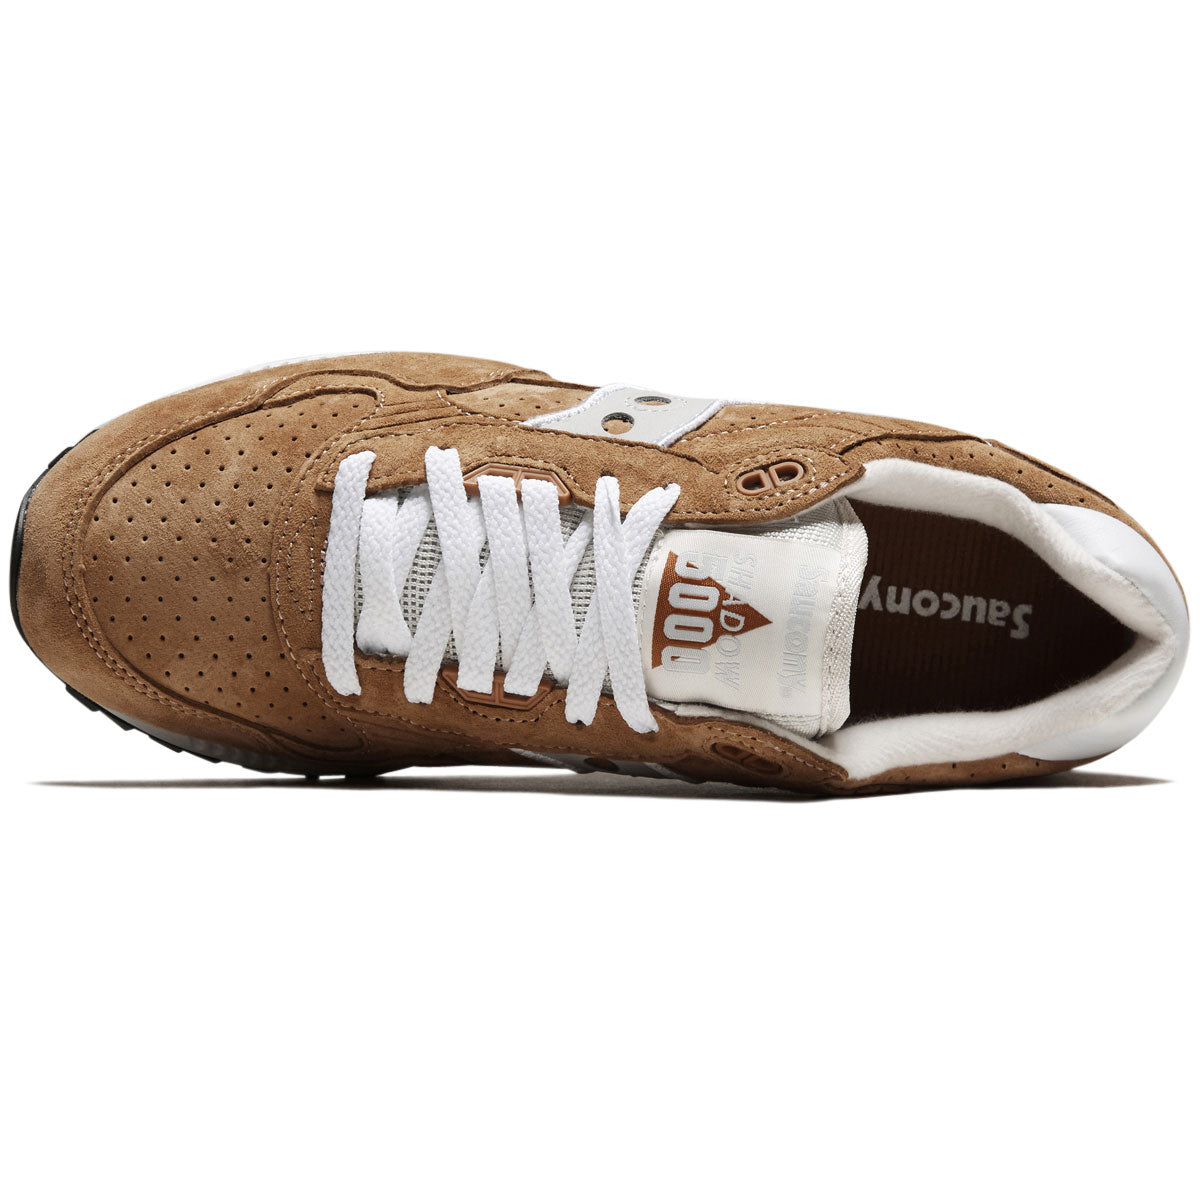 Saucony Shadow 5000 Shoes - Rust image 3